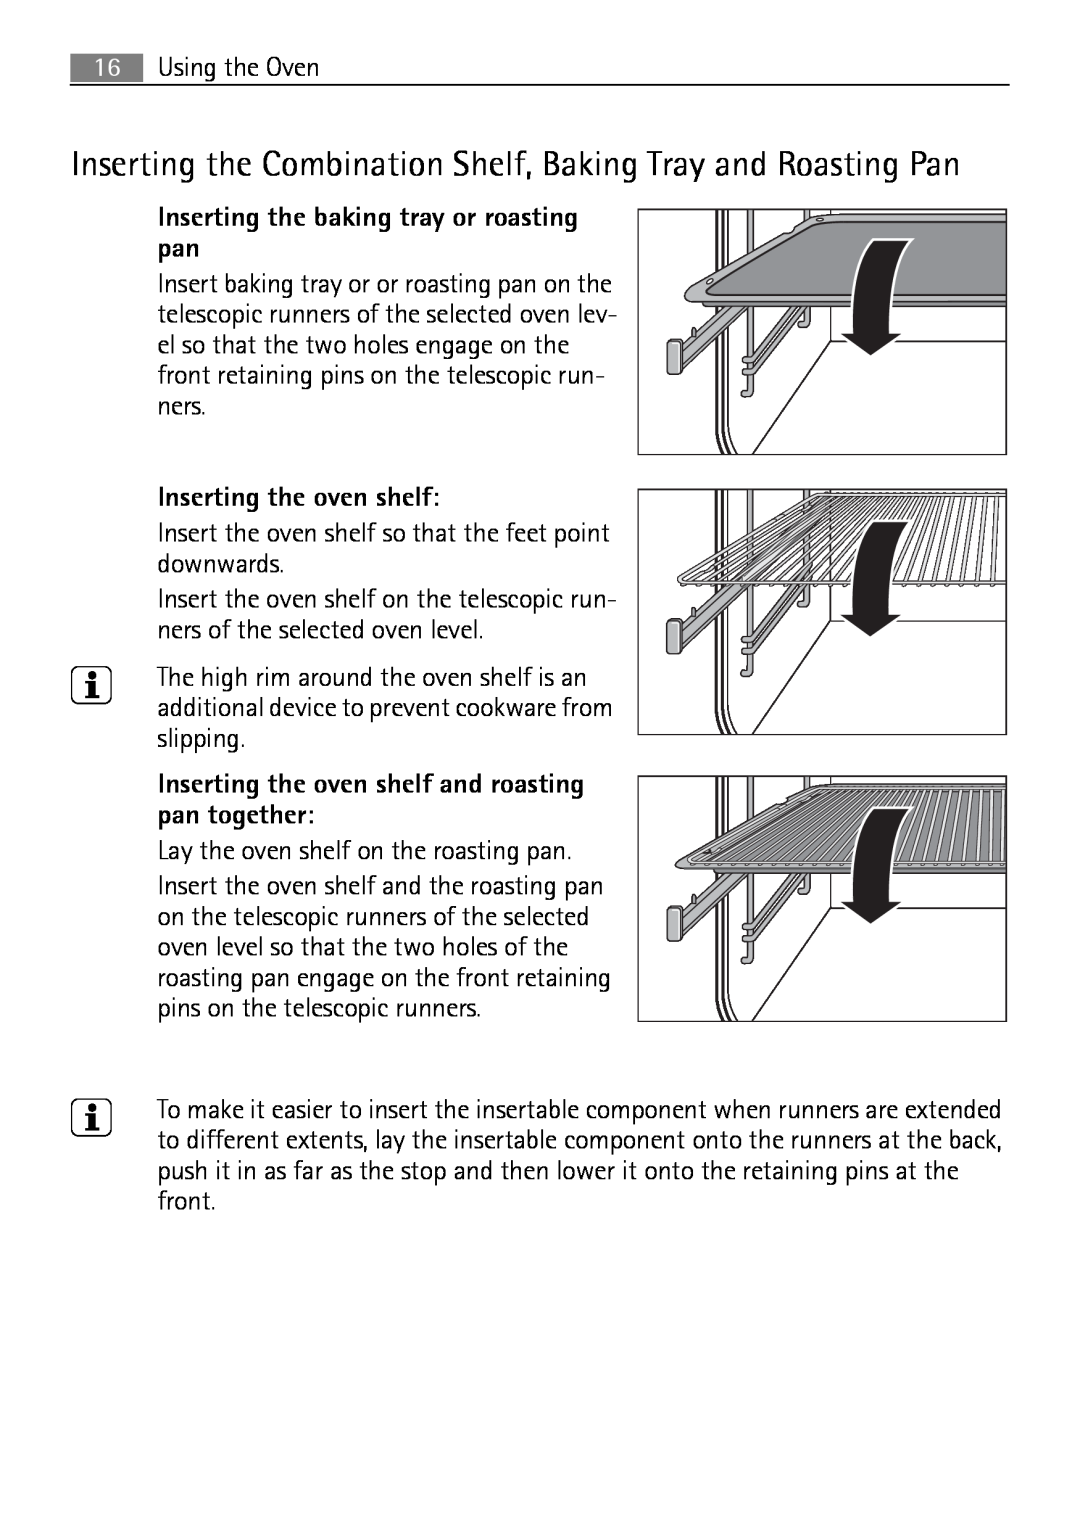 Electrolux E43012-5 user manual Inserting the Combination Shelf, Baking Tray and Roasting Pan, Inserting the oven shelf 